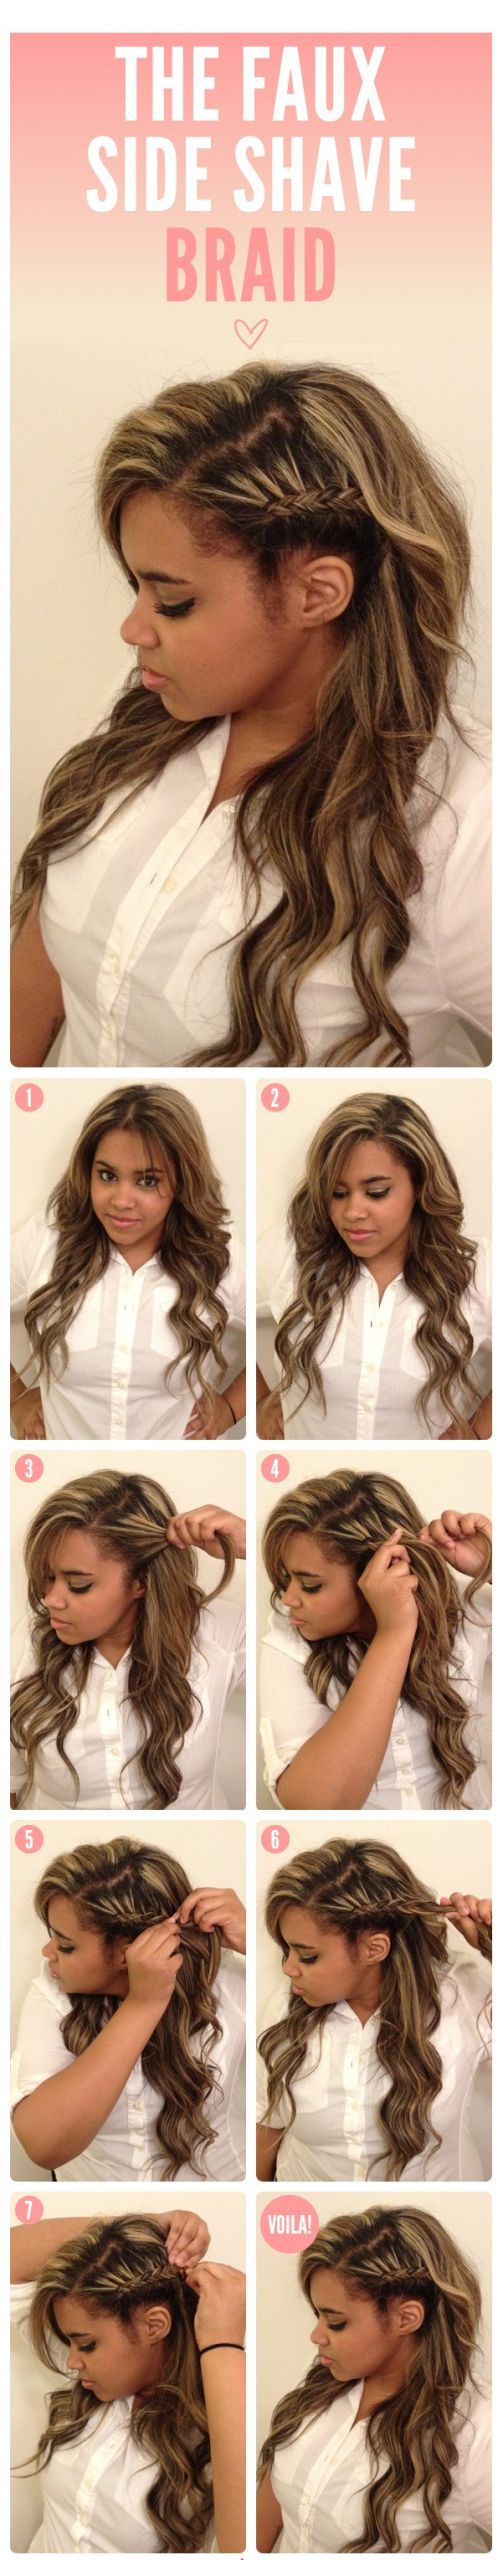 How To Make Cool Hairstyle
 Top 15 Easy To Make Braids Tutorials